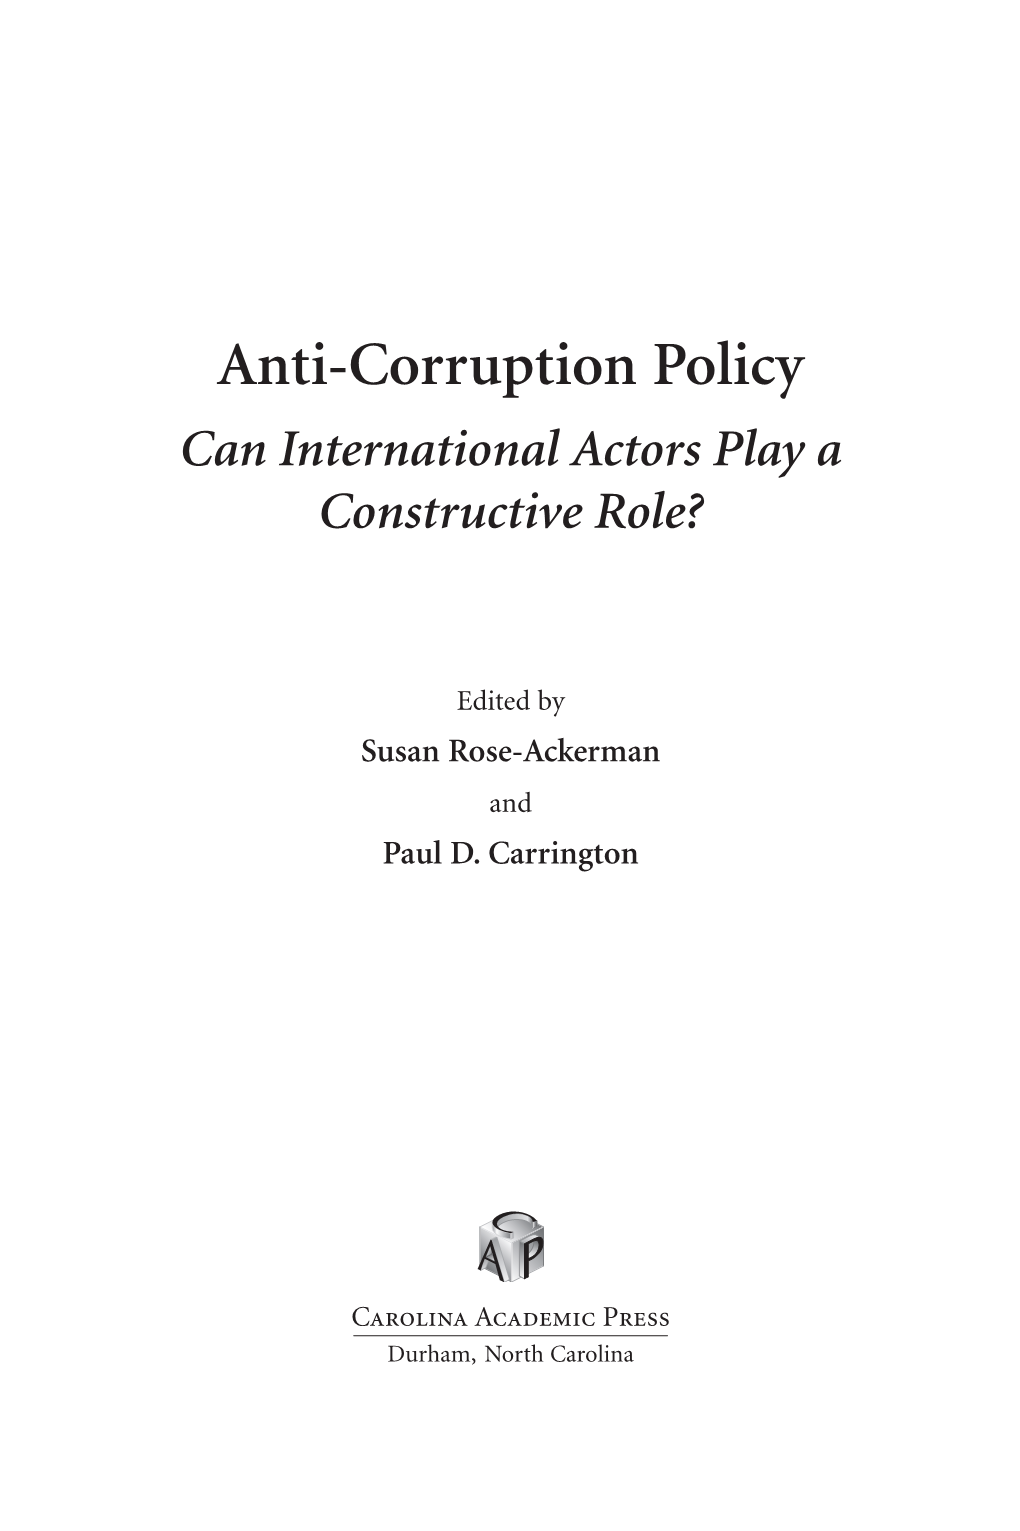 Anti-Corruption Policy Can International Actors Play a Constructive Role?